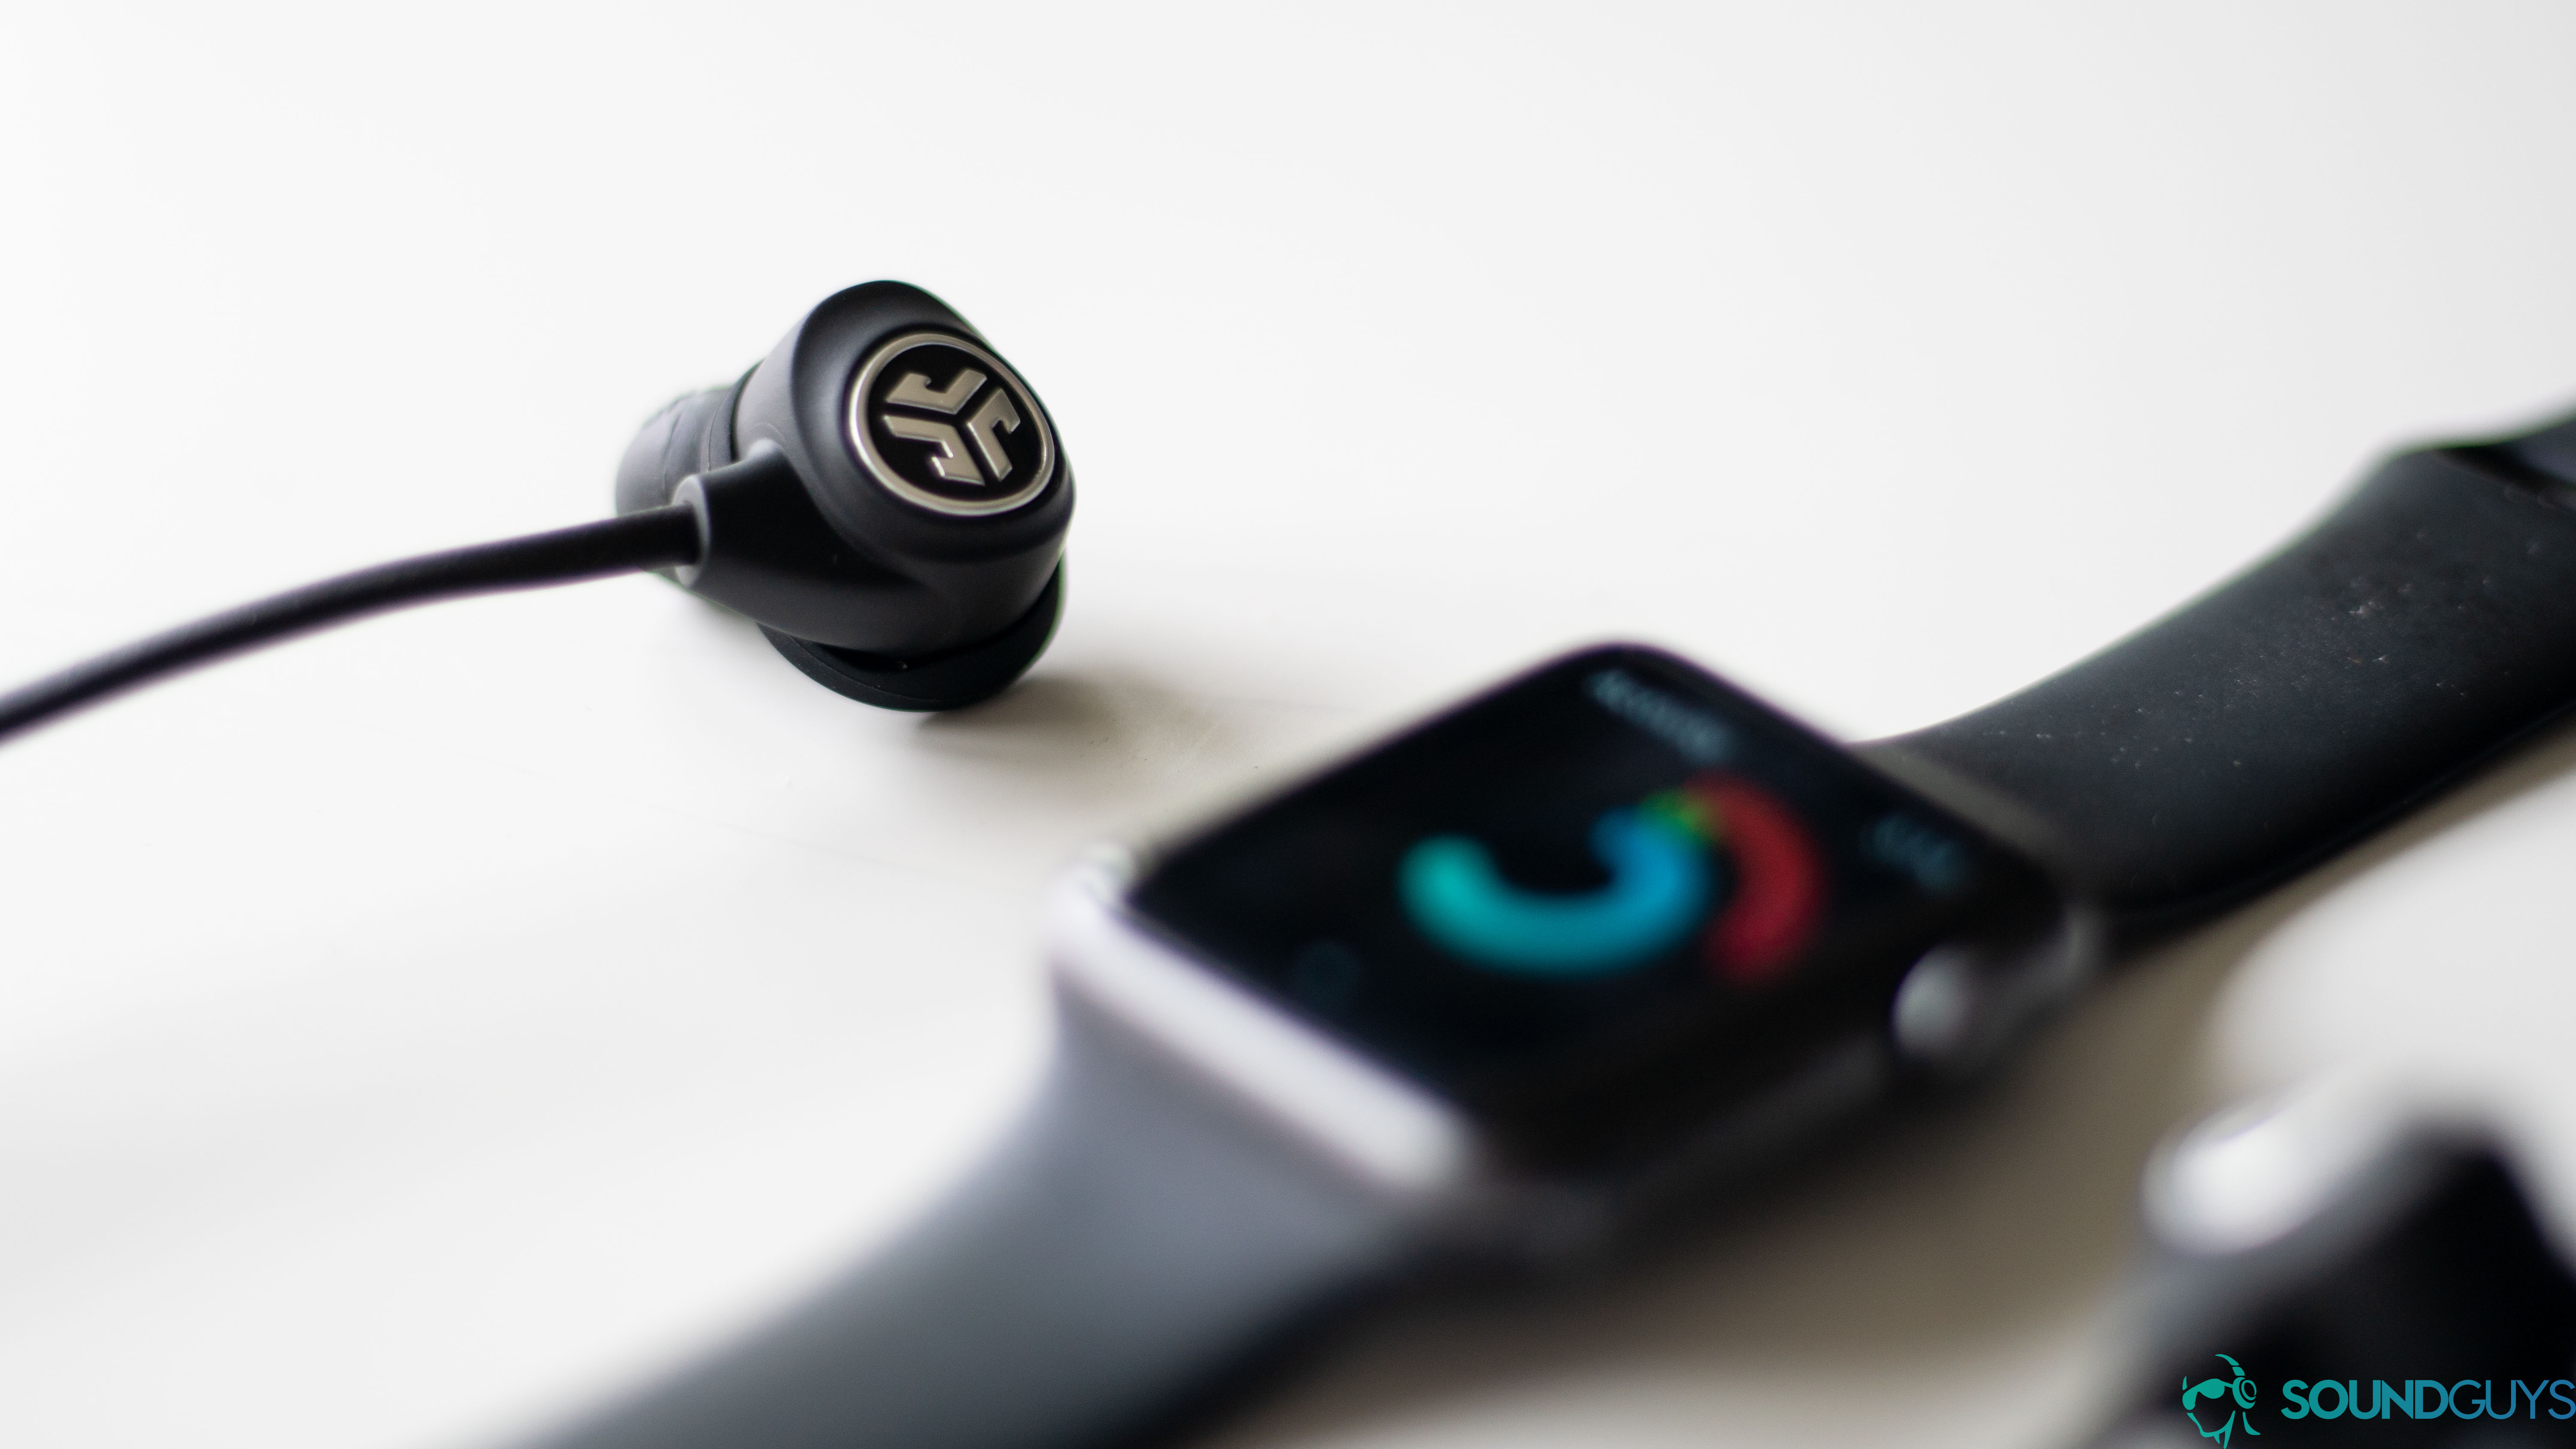 The headphones next to an Apple watch tracking fitness stats